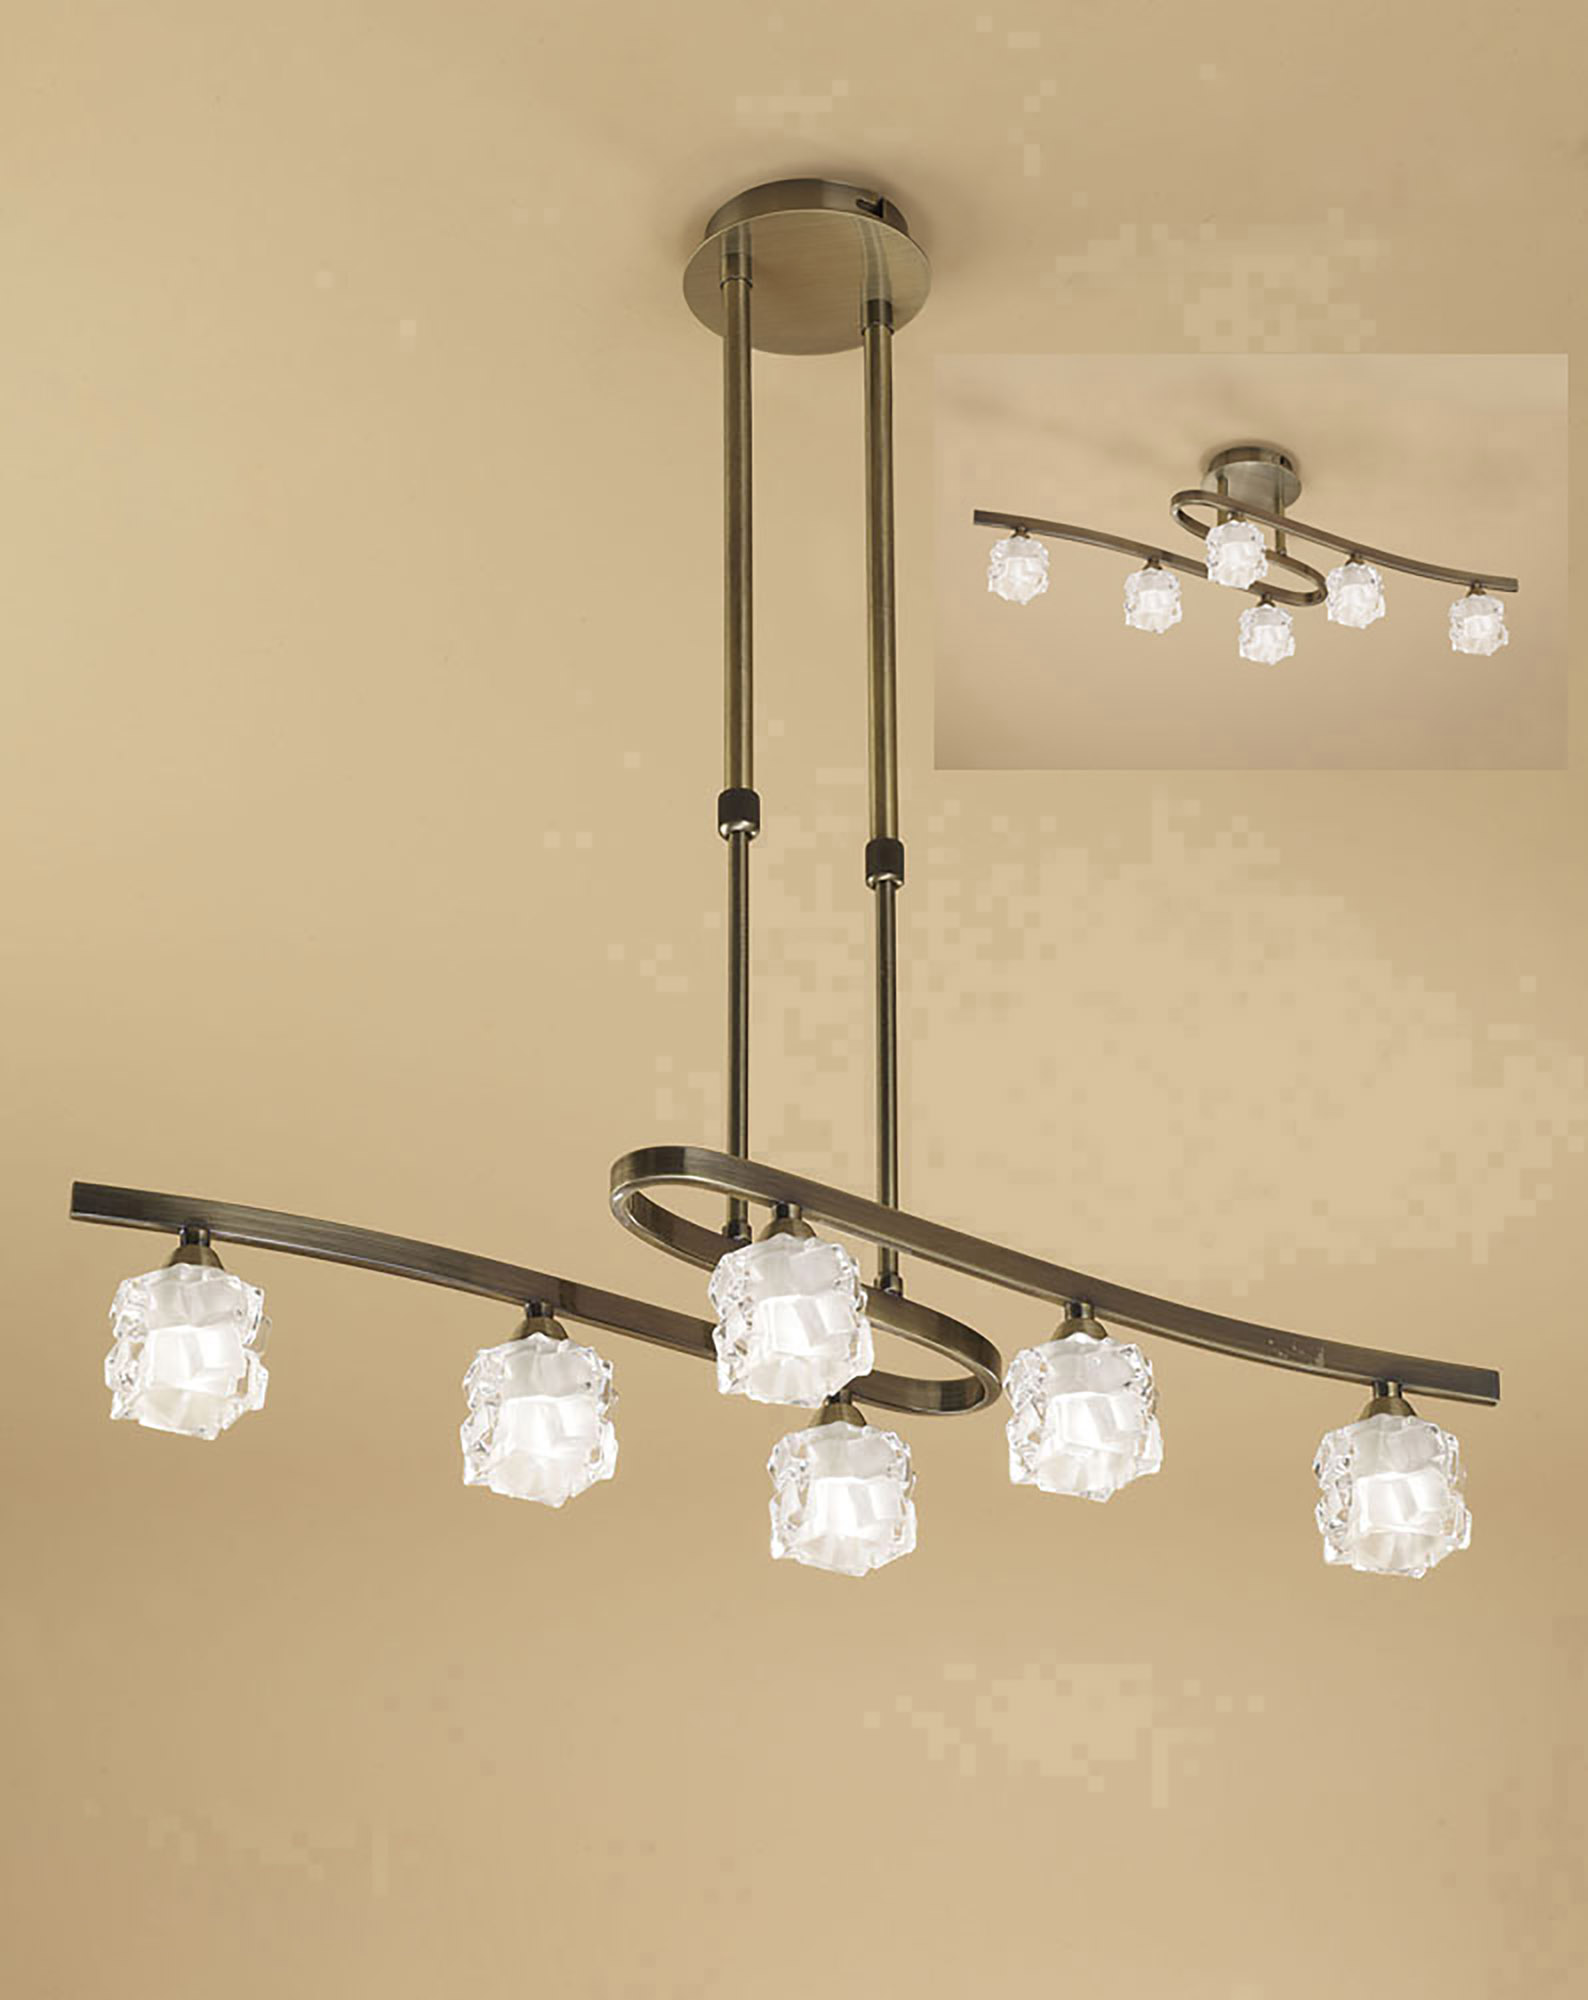 Ice Antique Brass Ceiling Lights Mantra Linear Fittings